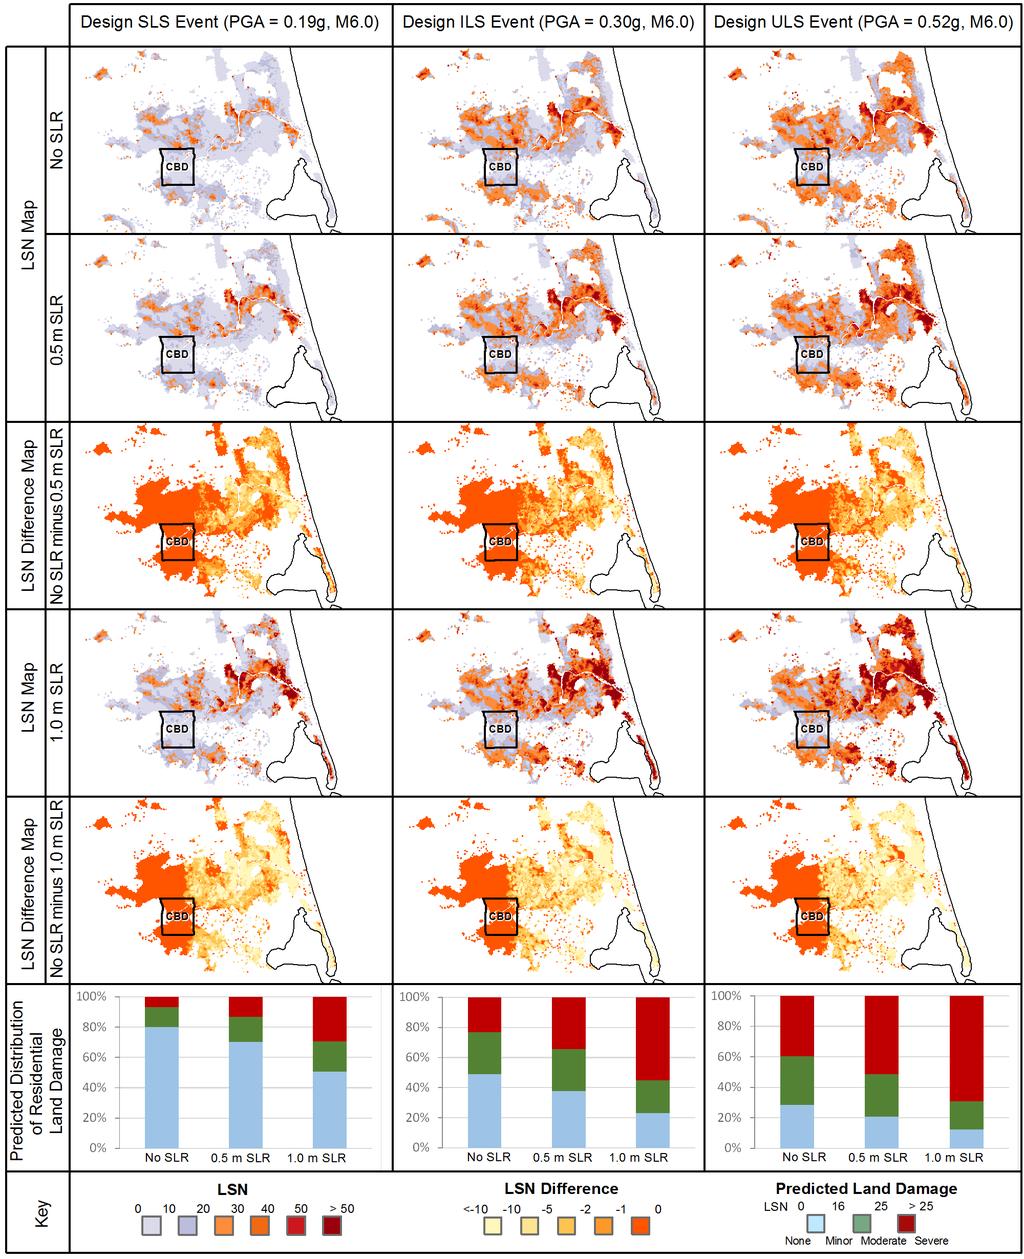 Figure 2: Spatial distribution of LSN based on the existing median groundwater surface and the groundwater surface after 0.